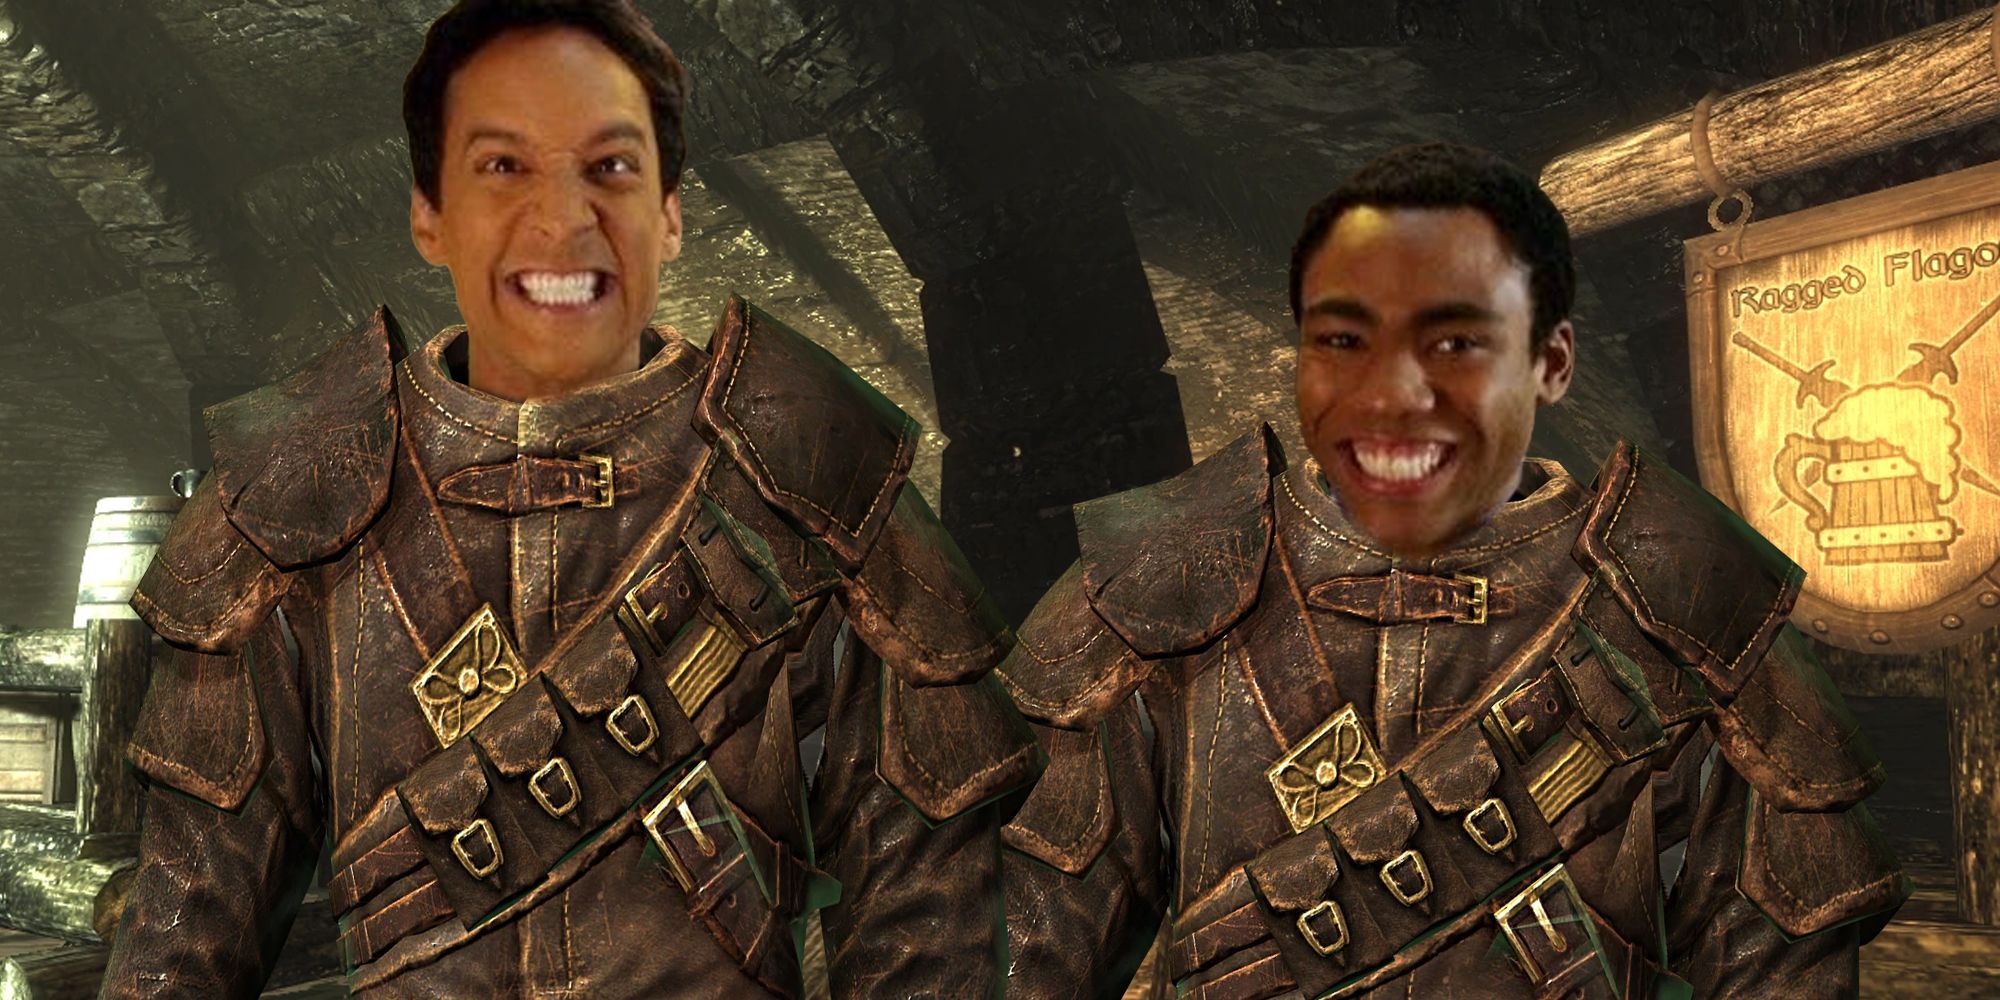 Troy and Abed from Community in an Elder Scrolls game